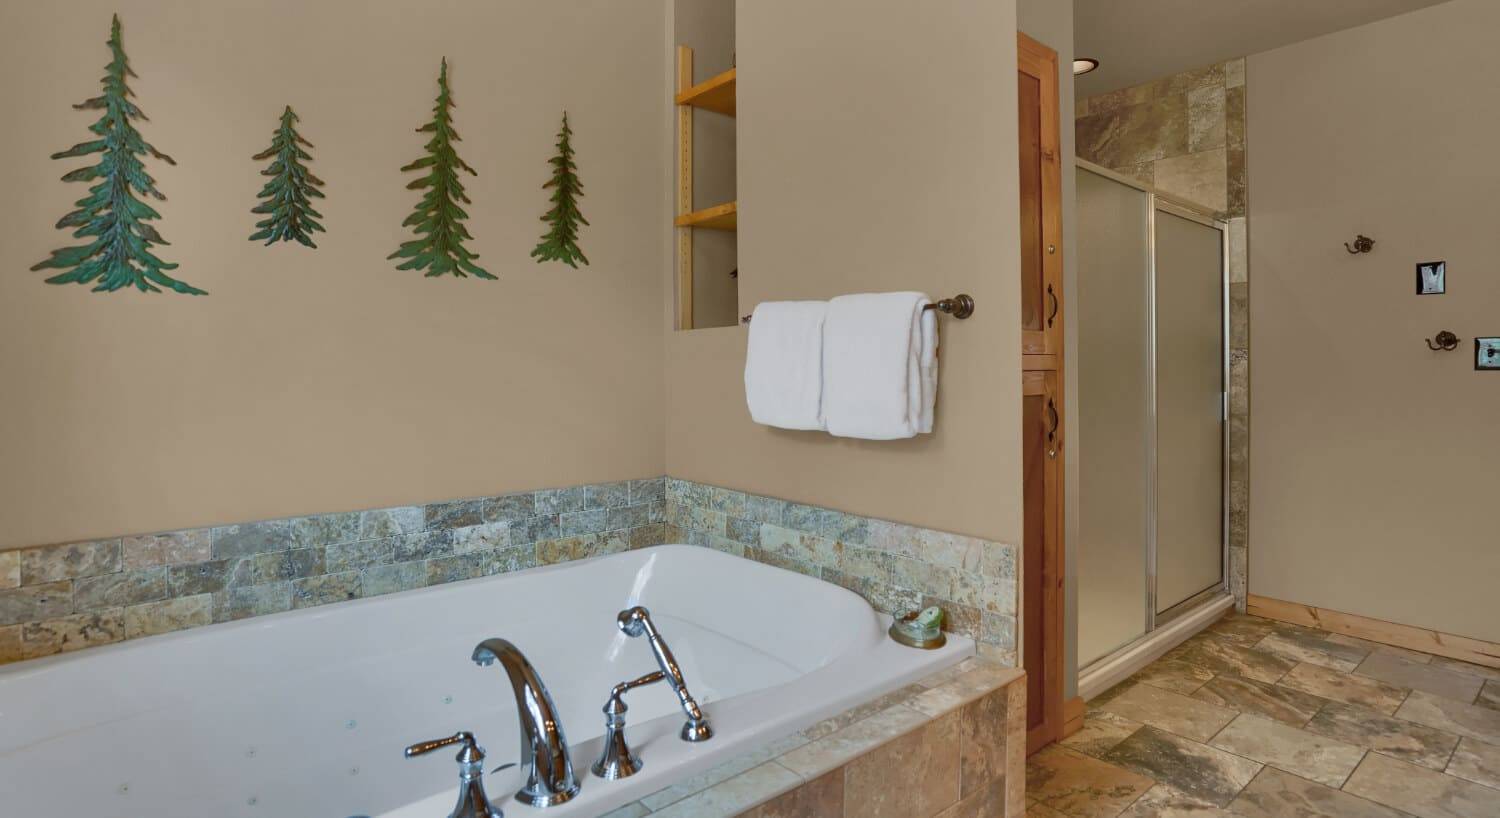 a deep jetted tub for two with green pine trees on the wall and a large walk in shower next to it